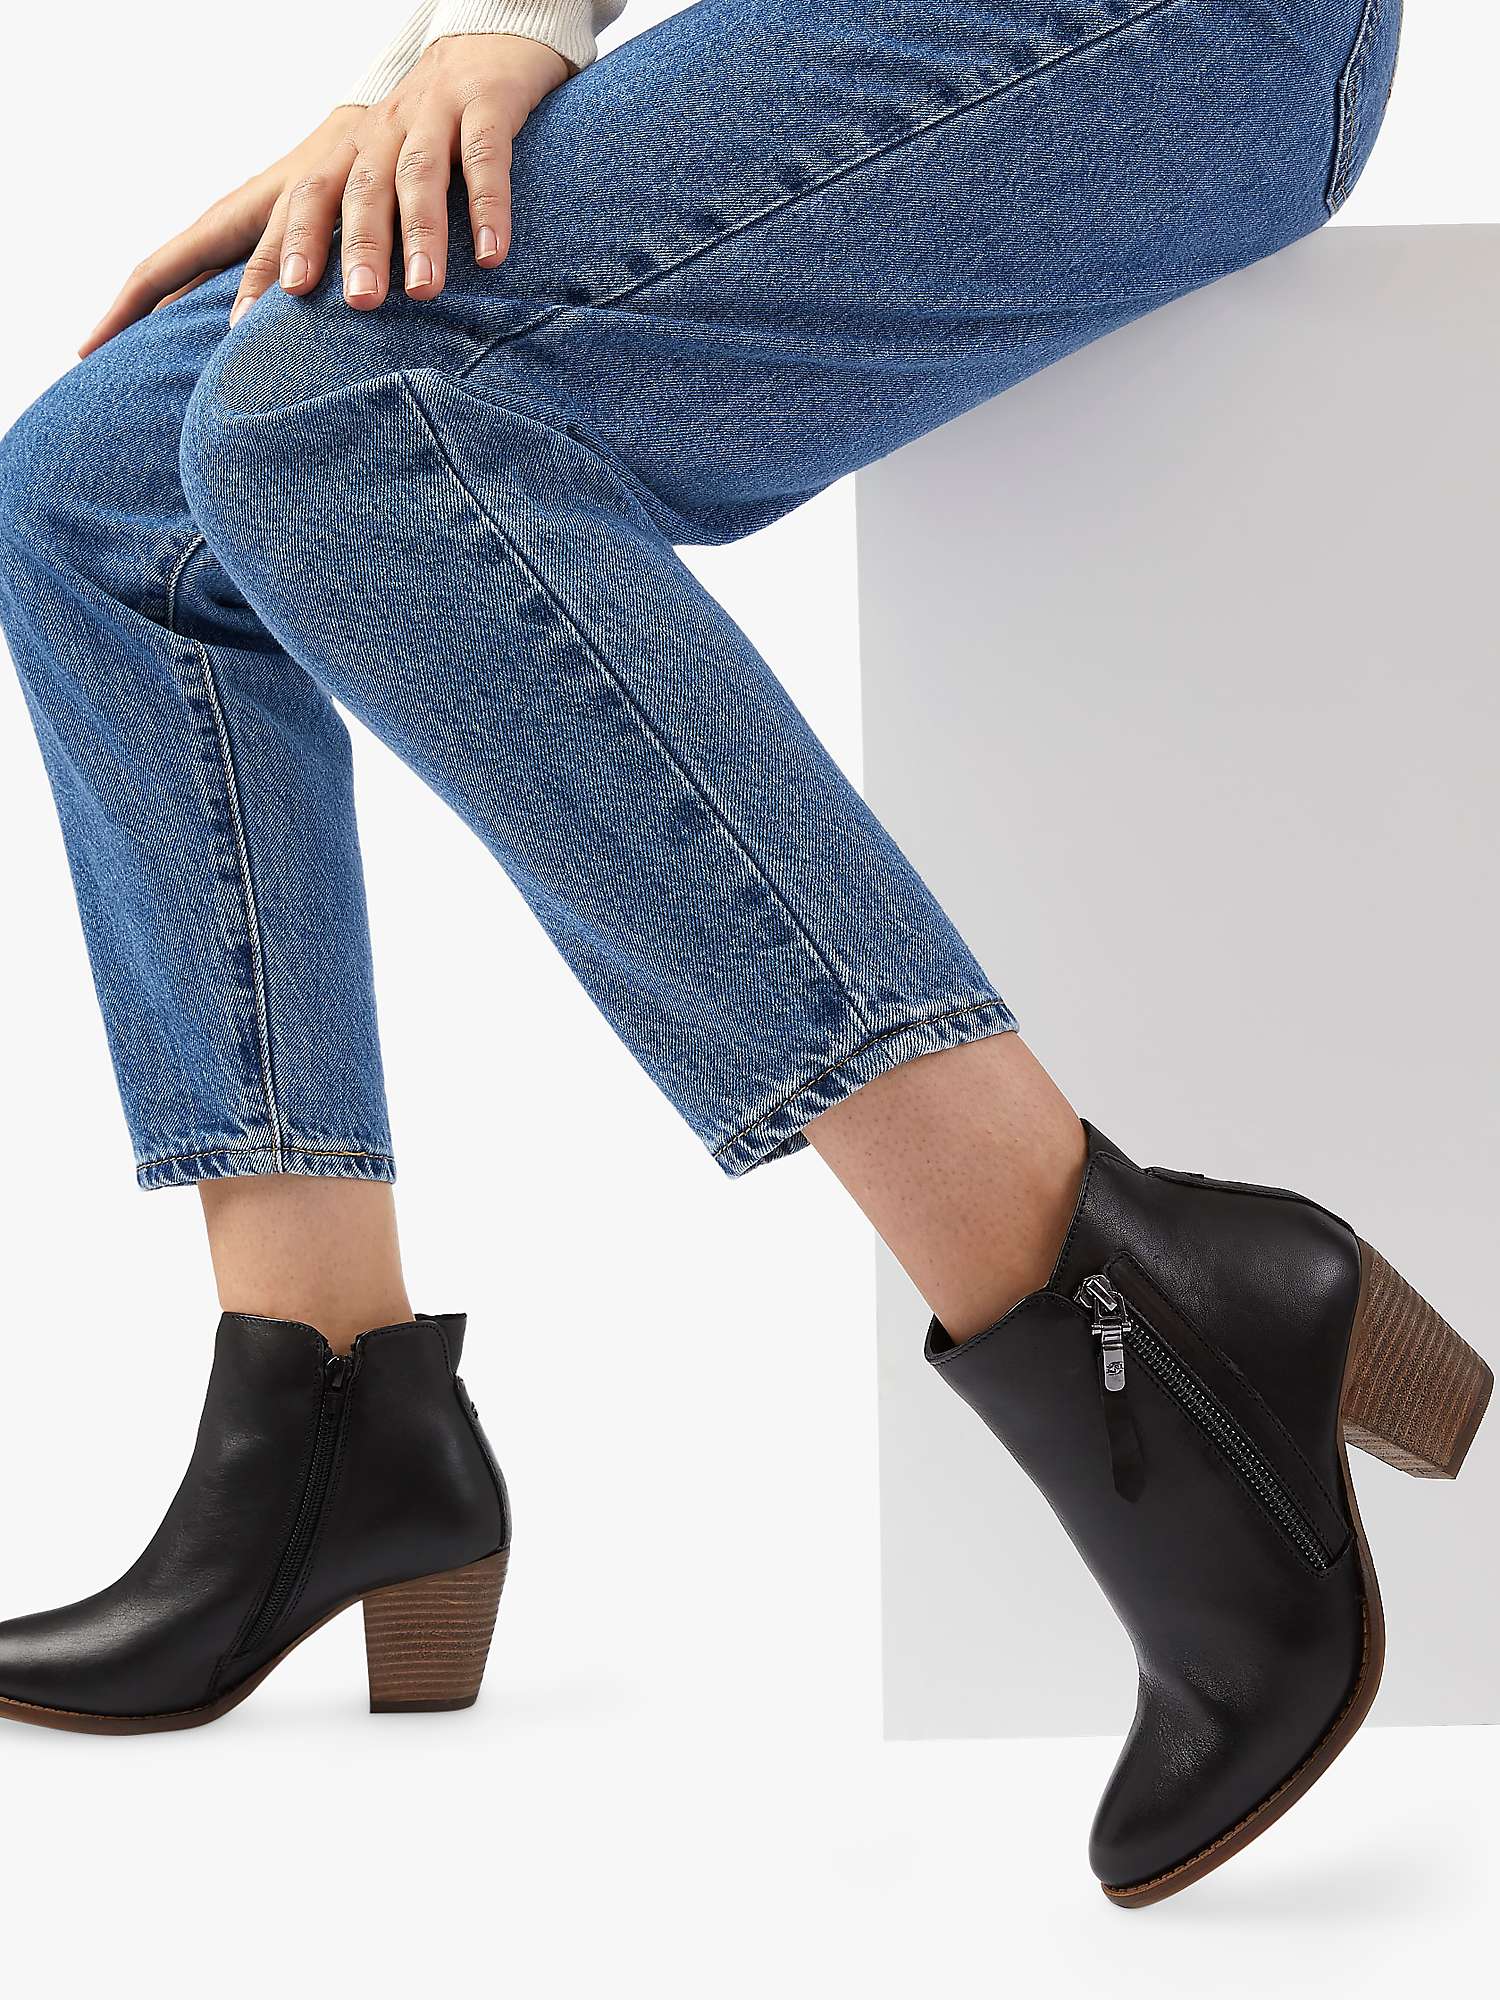 Buy Dune Paice Leather Side Zip Ankle Boots, Black Online at johnlewis.com